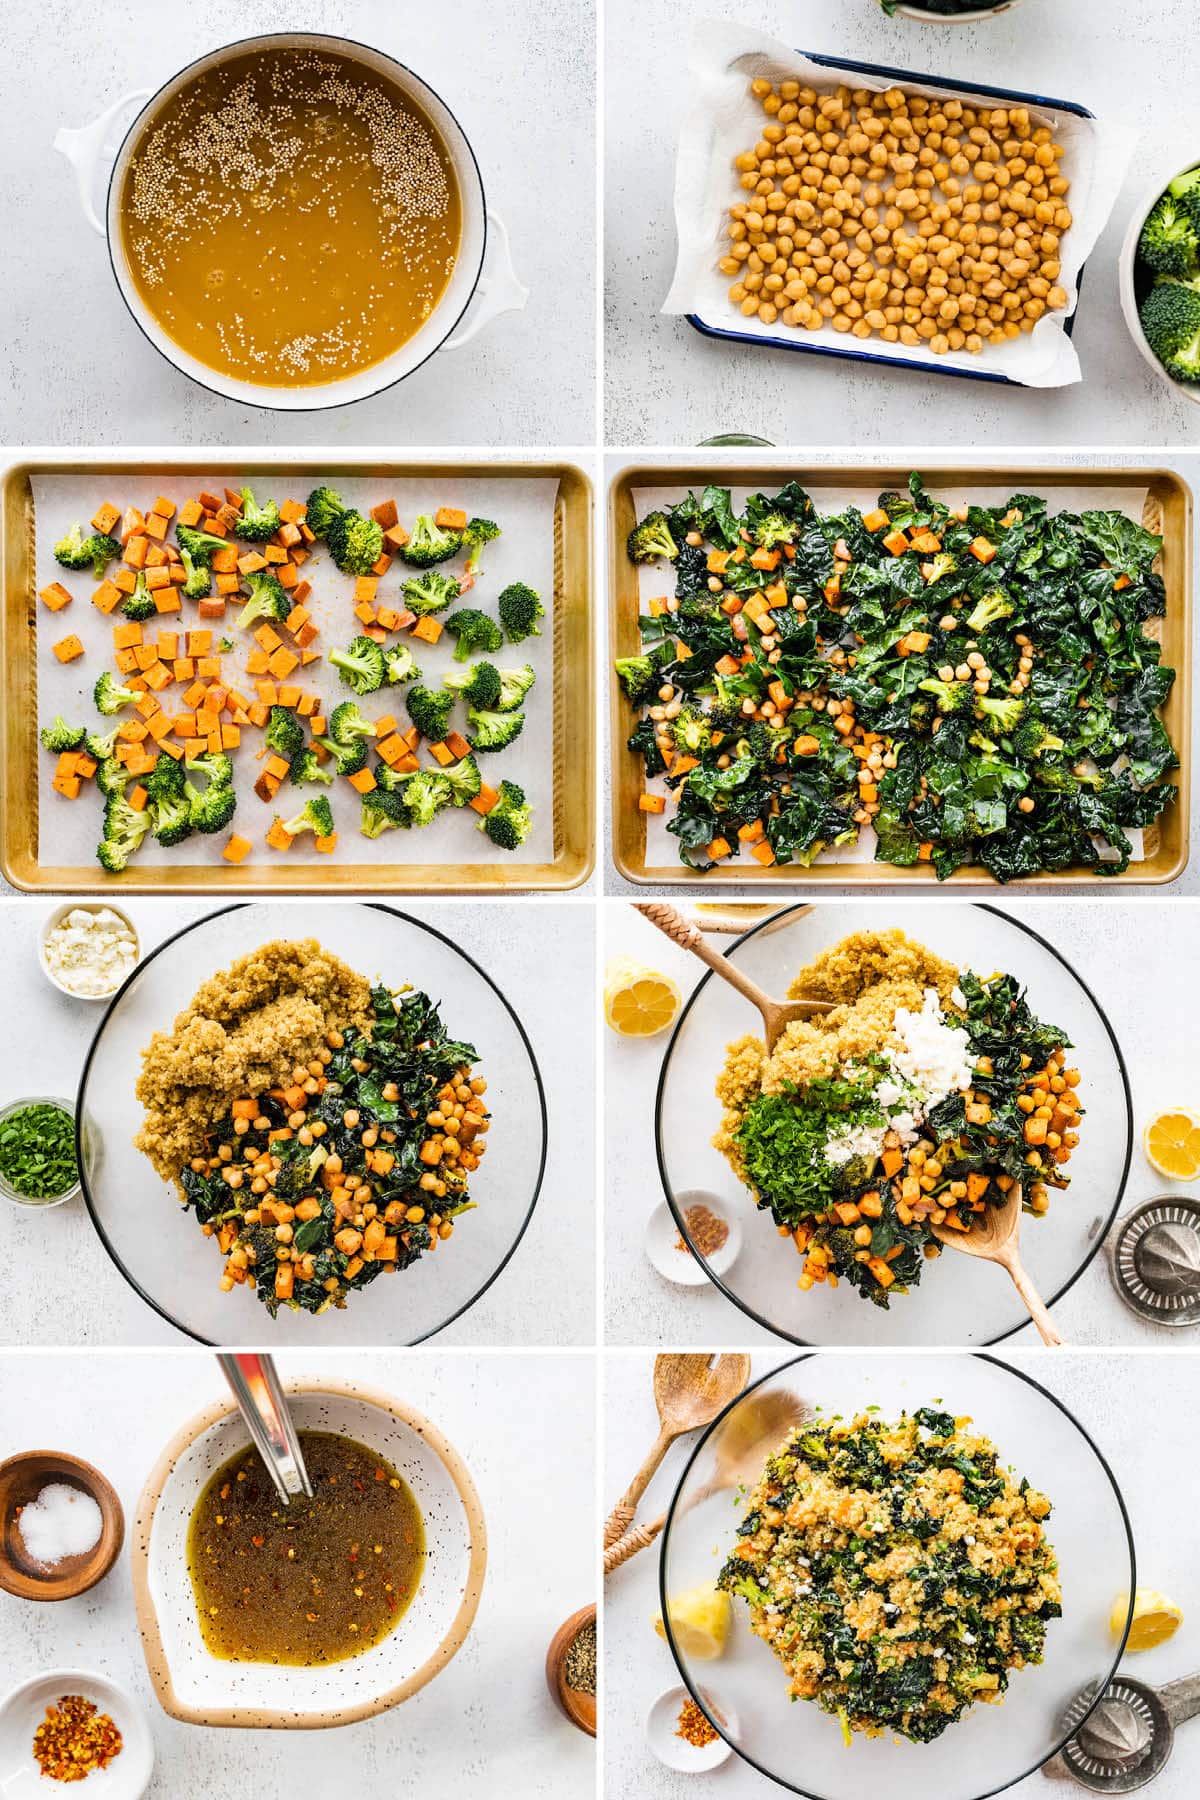 Collage of 8 process photos showing how to make Roasted Broccoli Salad: roasting chickpeas, kale and broccoli and tossing the veggies with quinoa, dressing and feta.